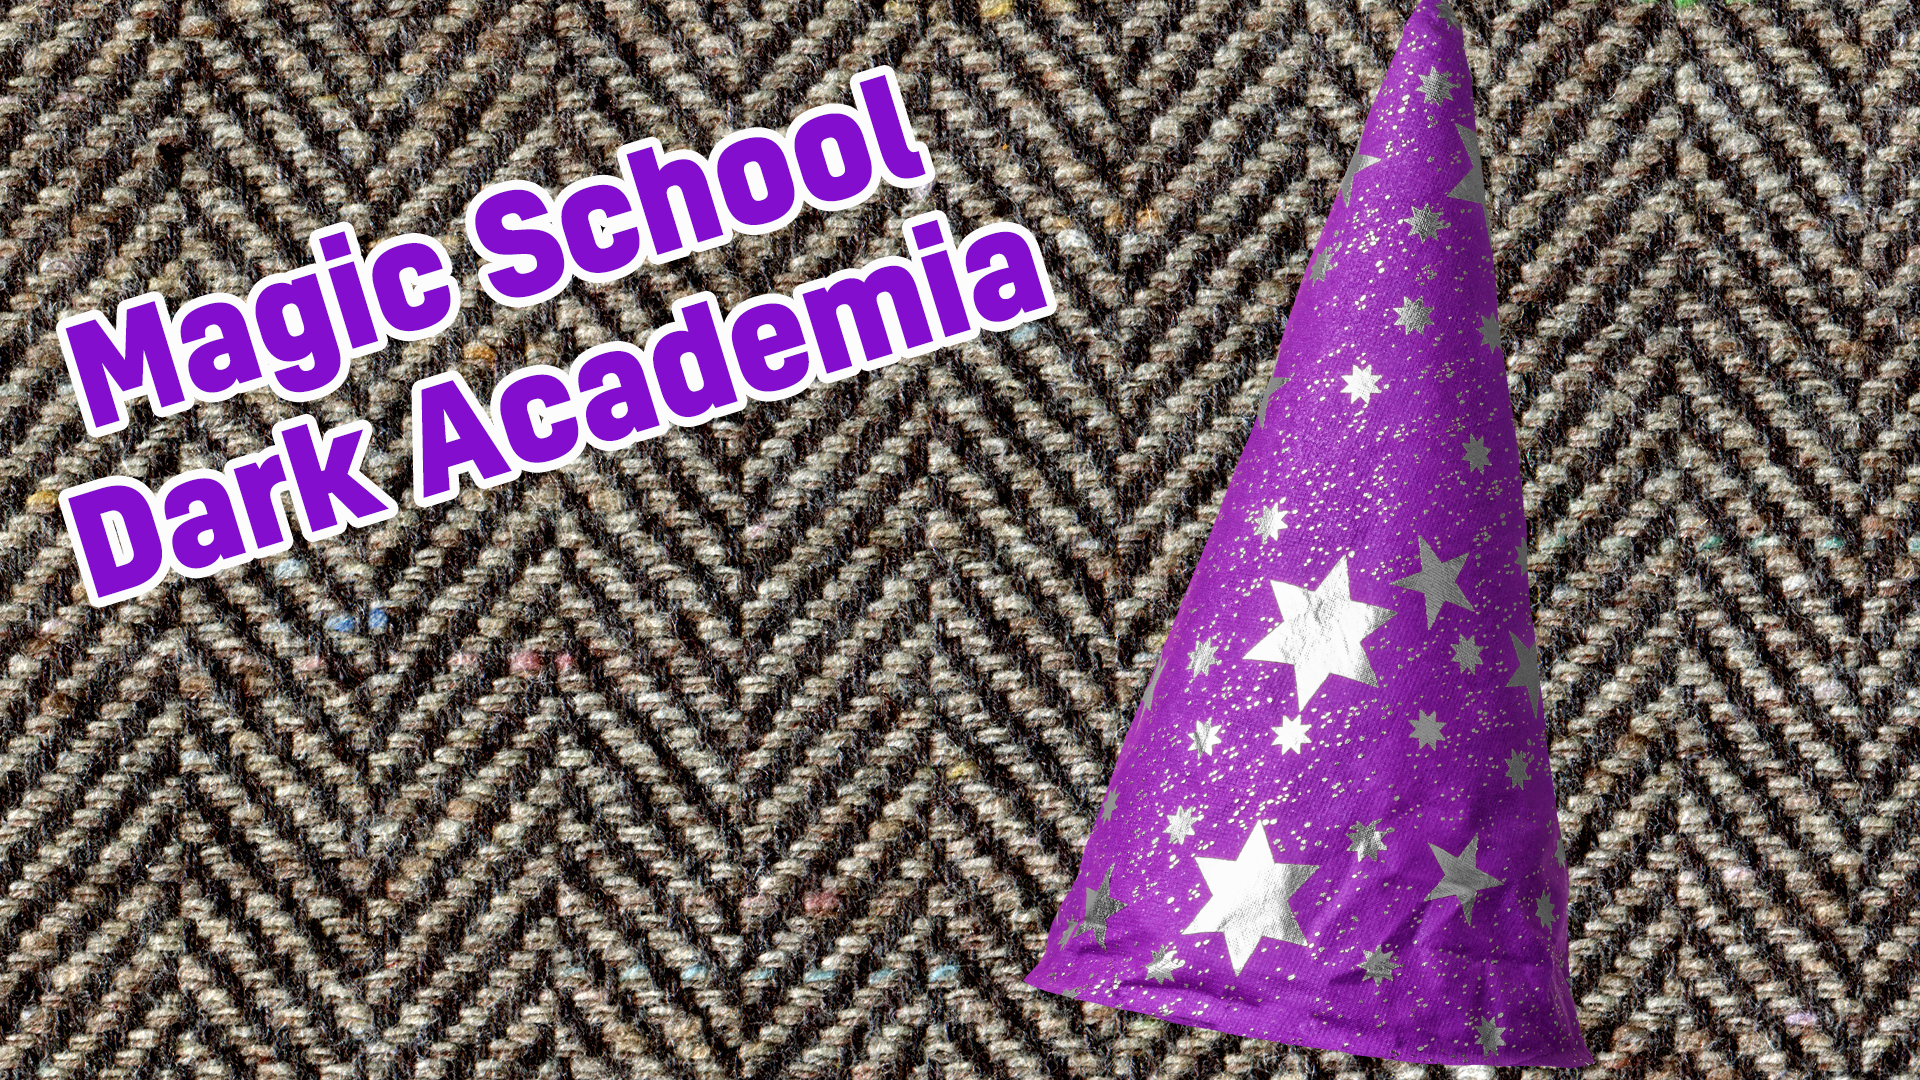 Your style is Magic School! You're most likely to be seen in your school uniform or some thing tartan, carrying a large pile of books between your classes as you learn magic! Accessorise with cosmic jewellery and sparkles!  